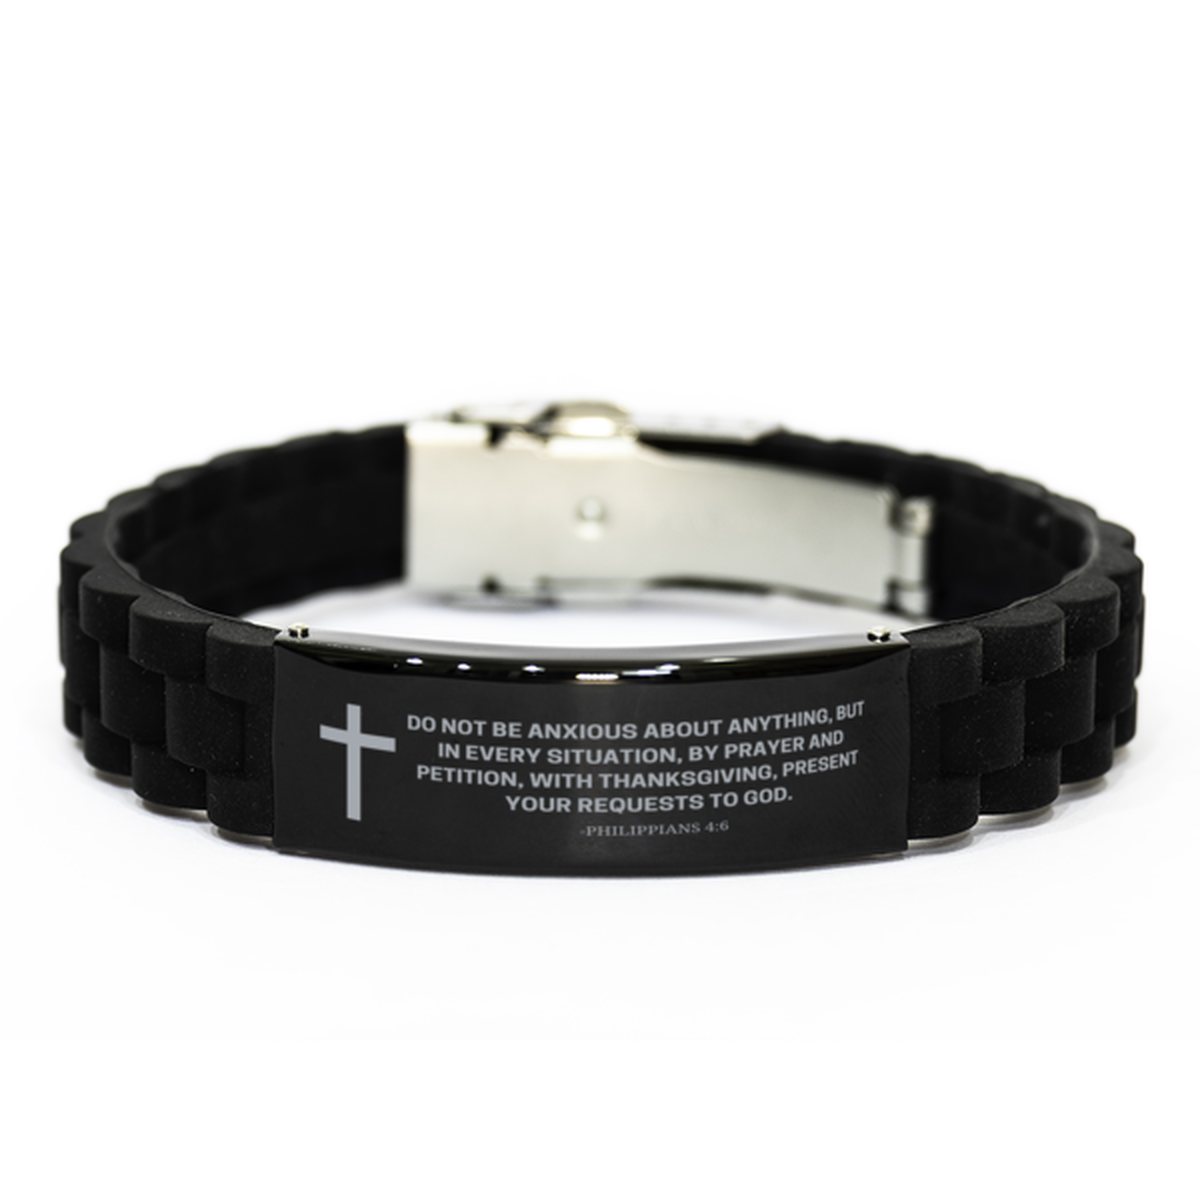 Baptism Gifts For Teenage Boys Girls, Christian Bible Verse Black Glidelock Clasp Bracelet, Do not be anxious about anything, Catholic Confirmation Gifts for Son, Godson, Grandson, Nephew